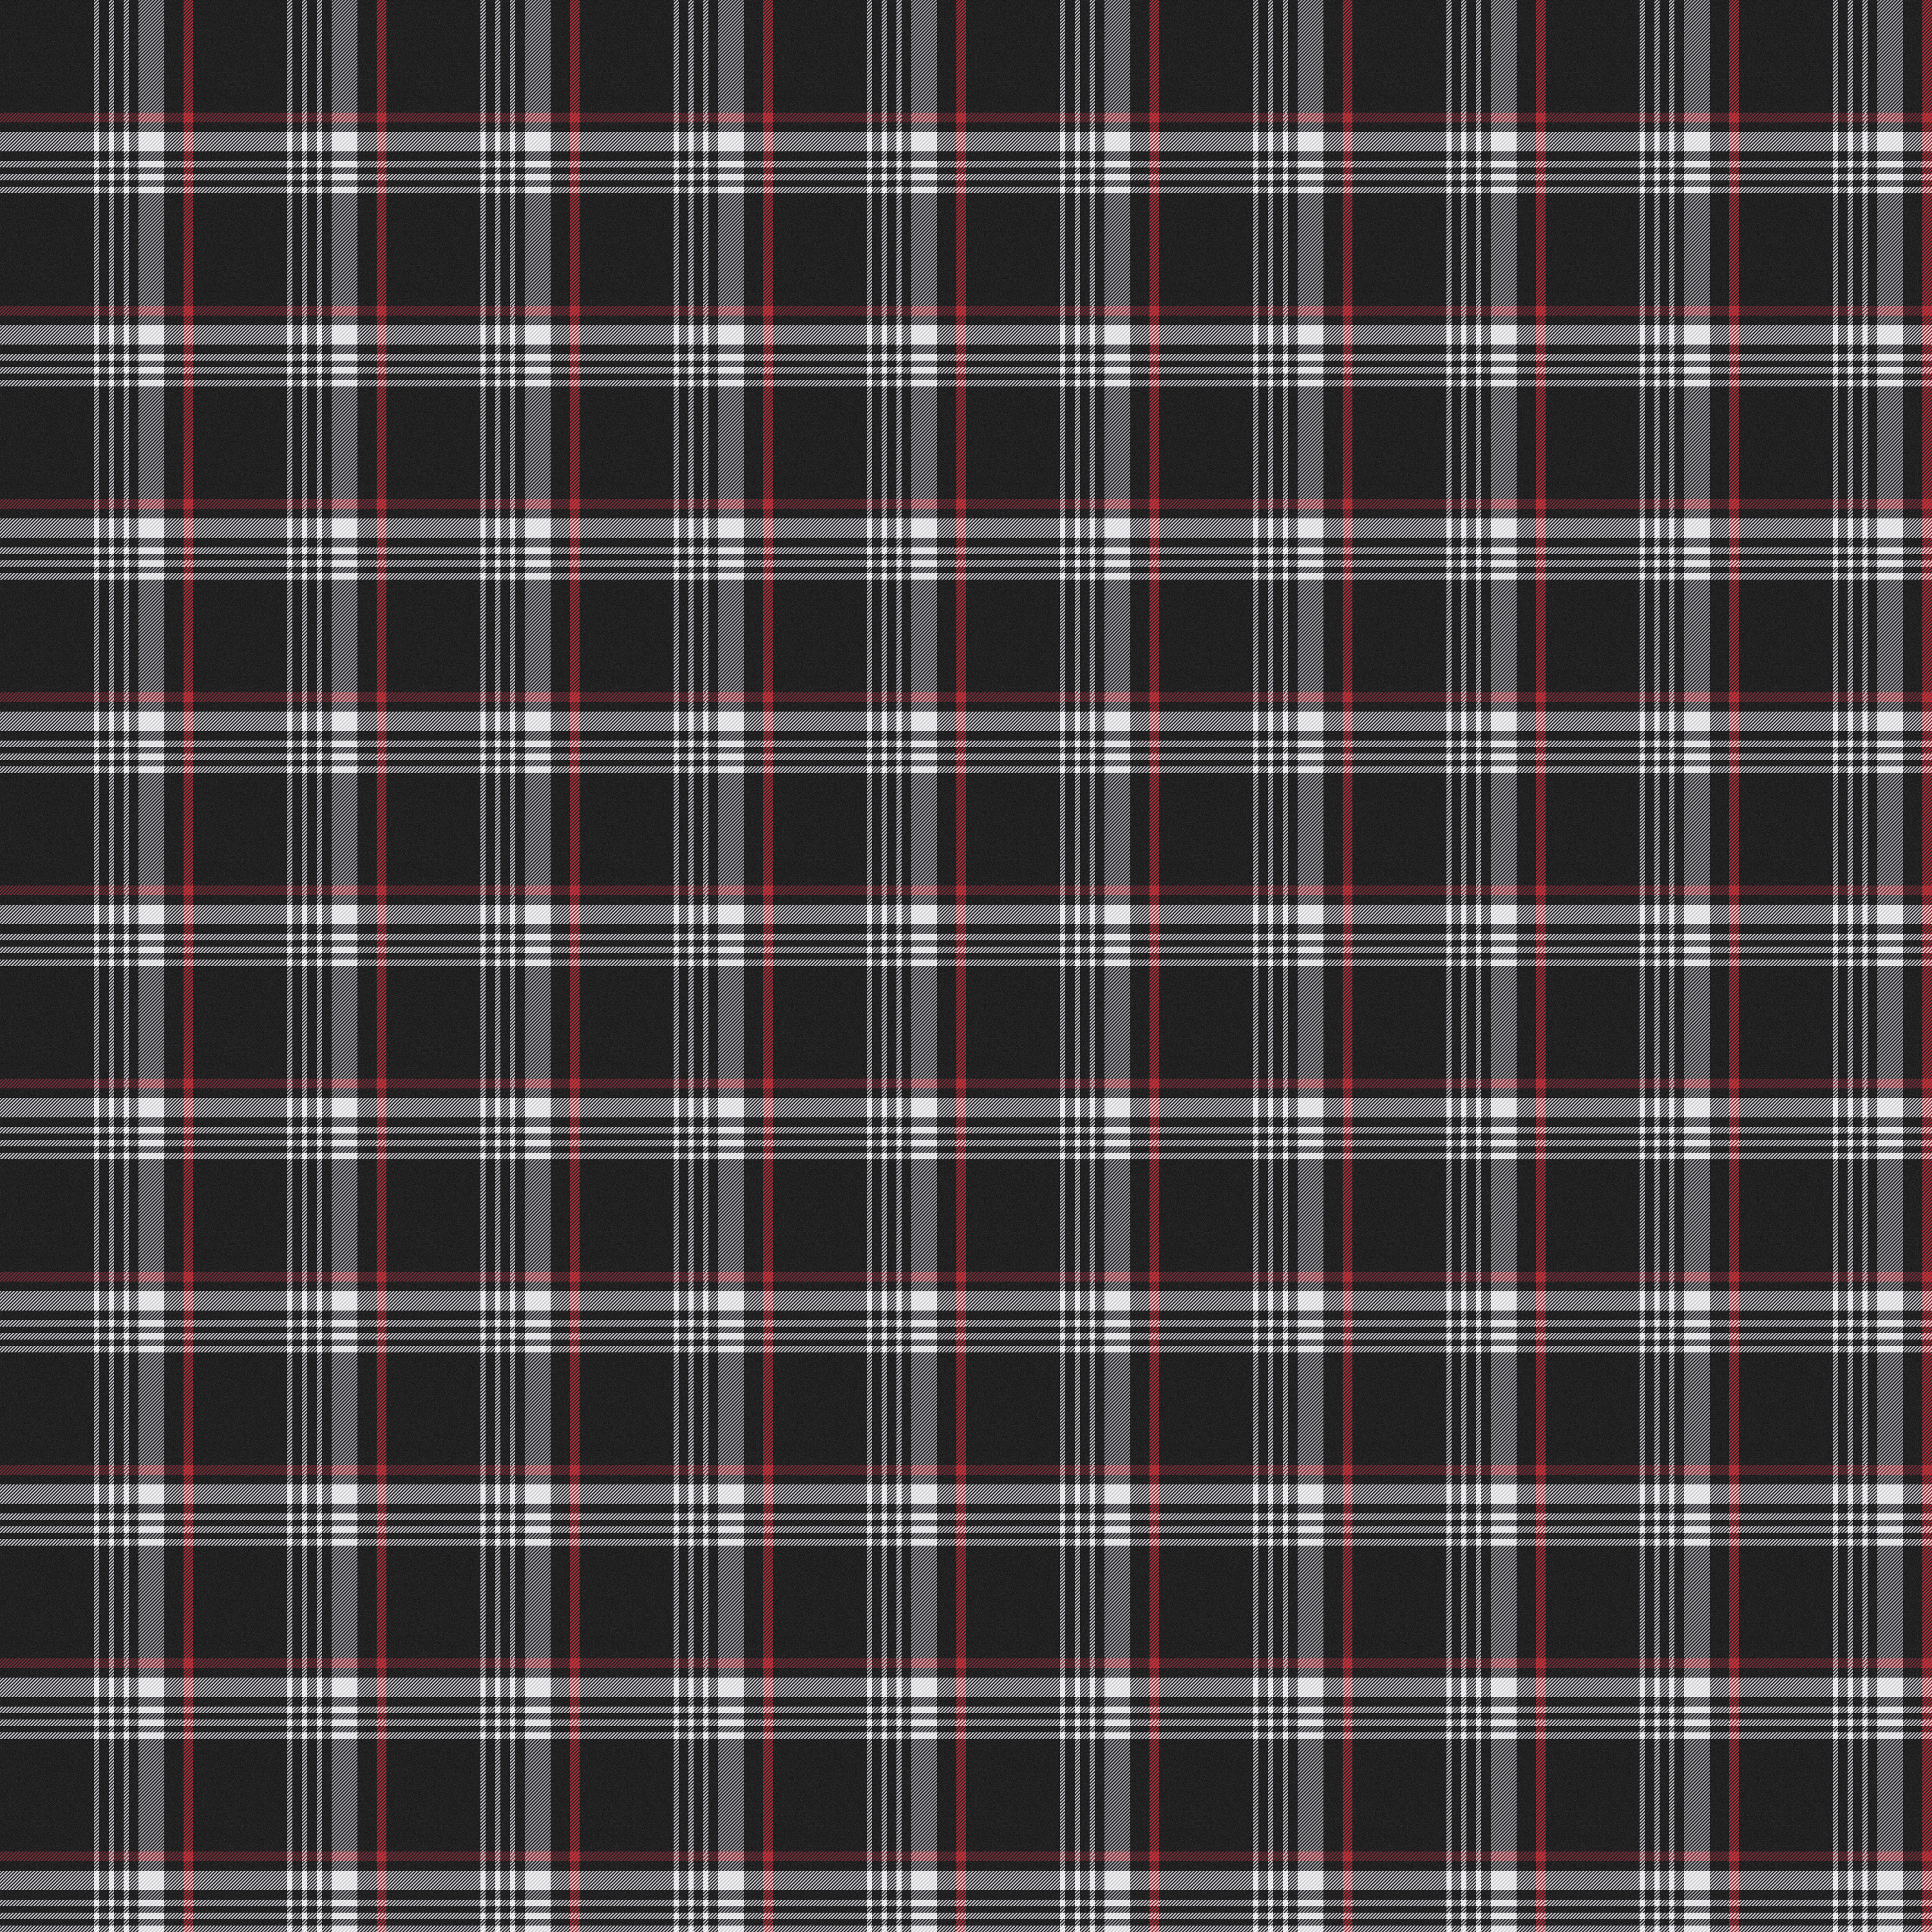 Golf GTI plaid wallpaper with stitching GolfGTI